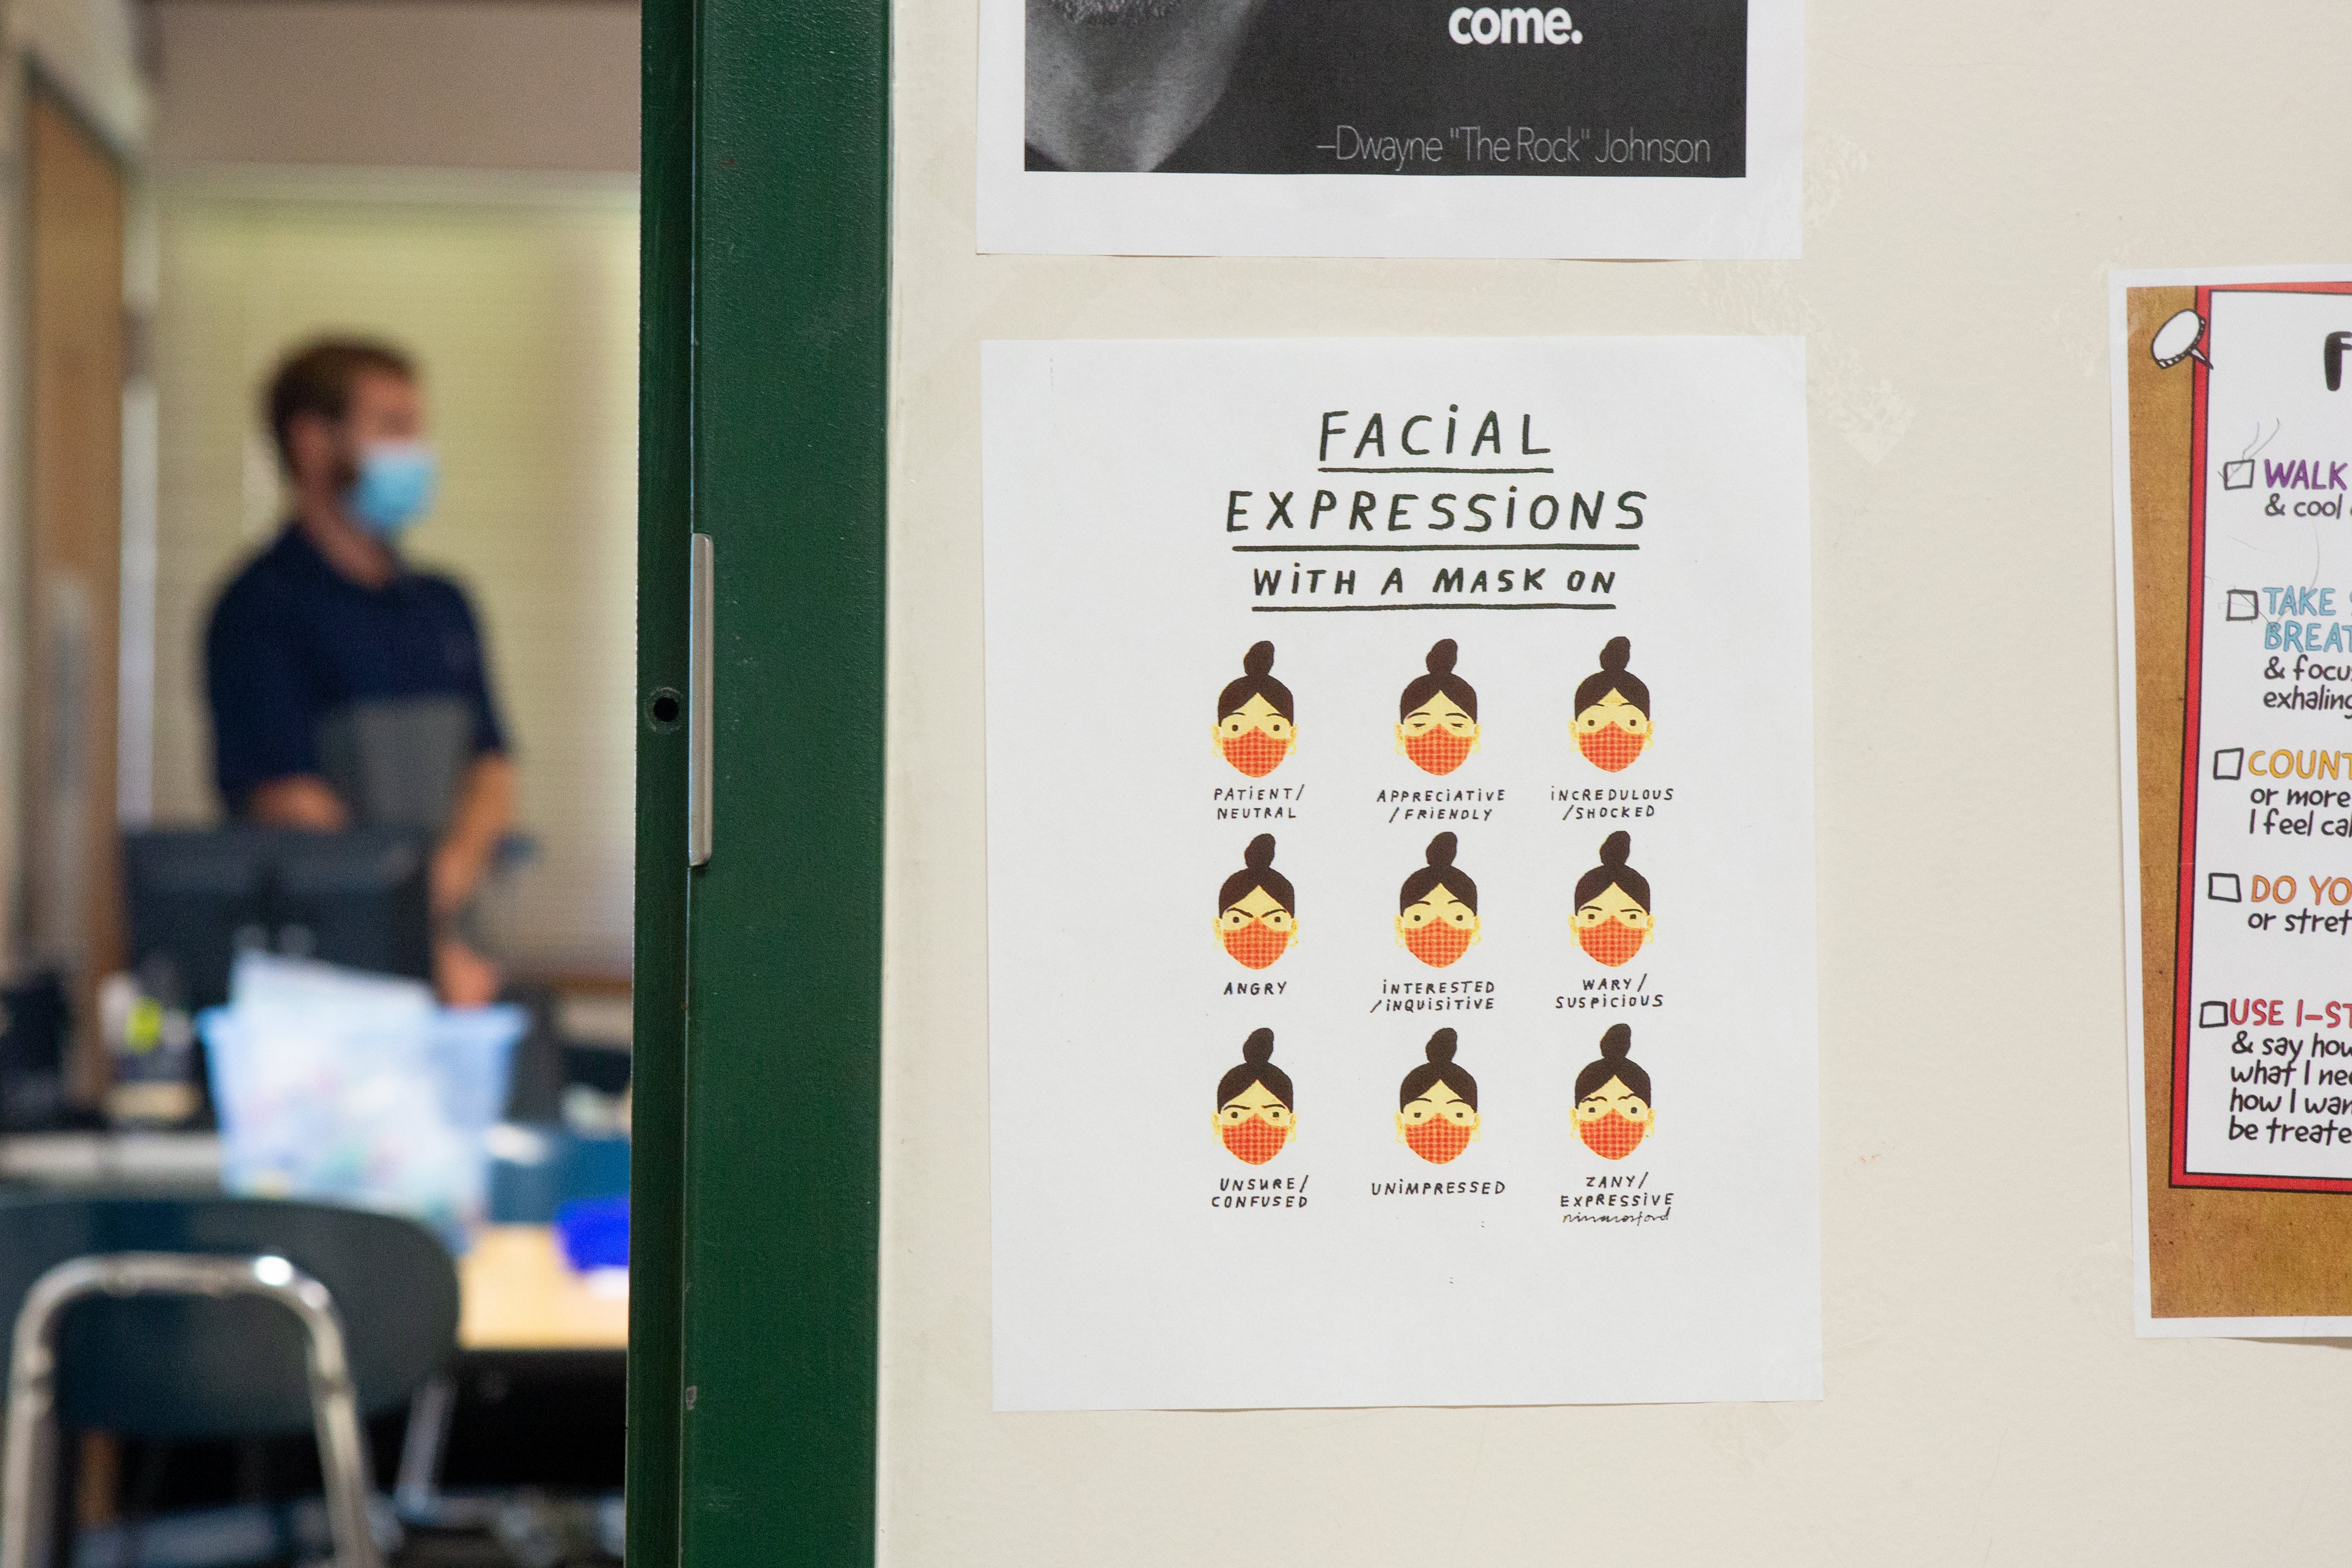 A sign that reads: Facial expressions with a mask on, posted on a wall outside a classroom, where a male is seen standing and wearing a mask.